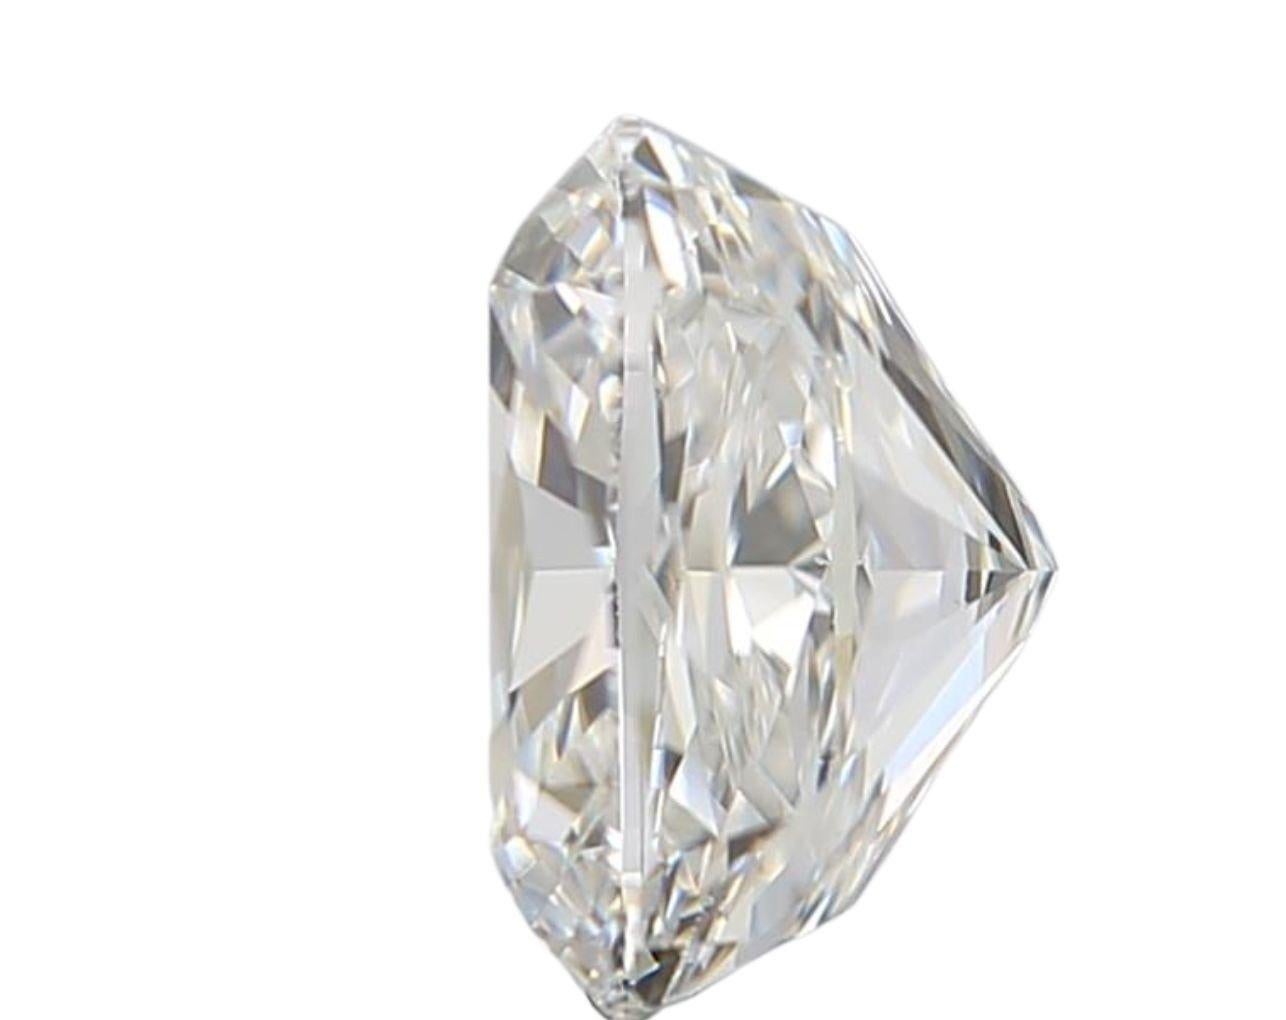 1 sparkling natural cushion modified brilliant diamond in a 0.84 carat E VVS2 with excellent cut. This diamond comes with GIA Certificate and laser inscription number.

SKU: 1237
GIA 6442187894